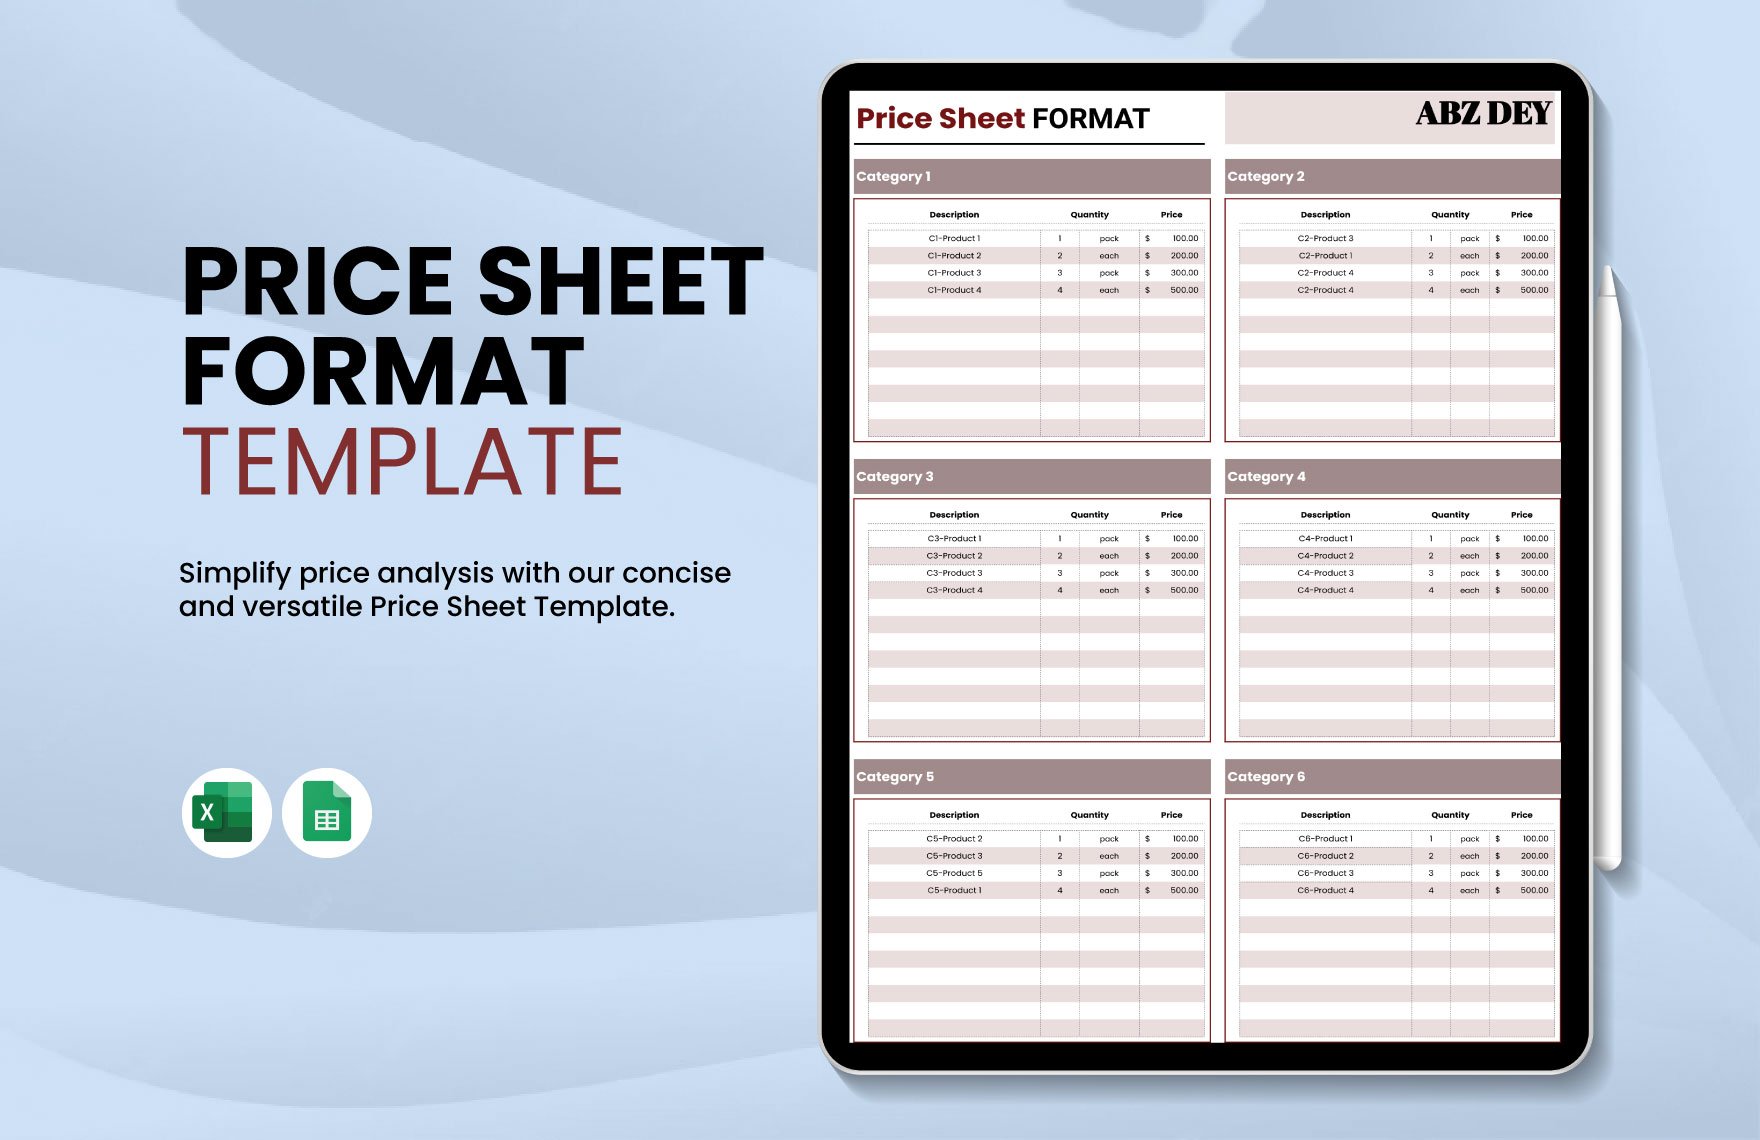 Price Sheet Format Template in Excel, Google Sheets